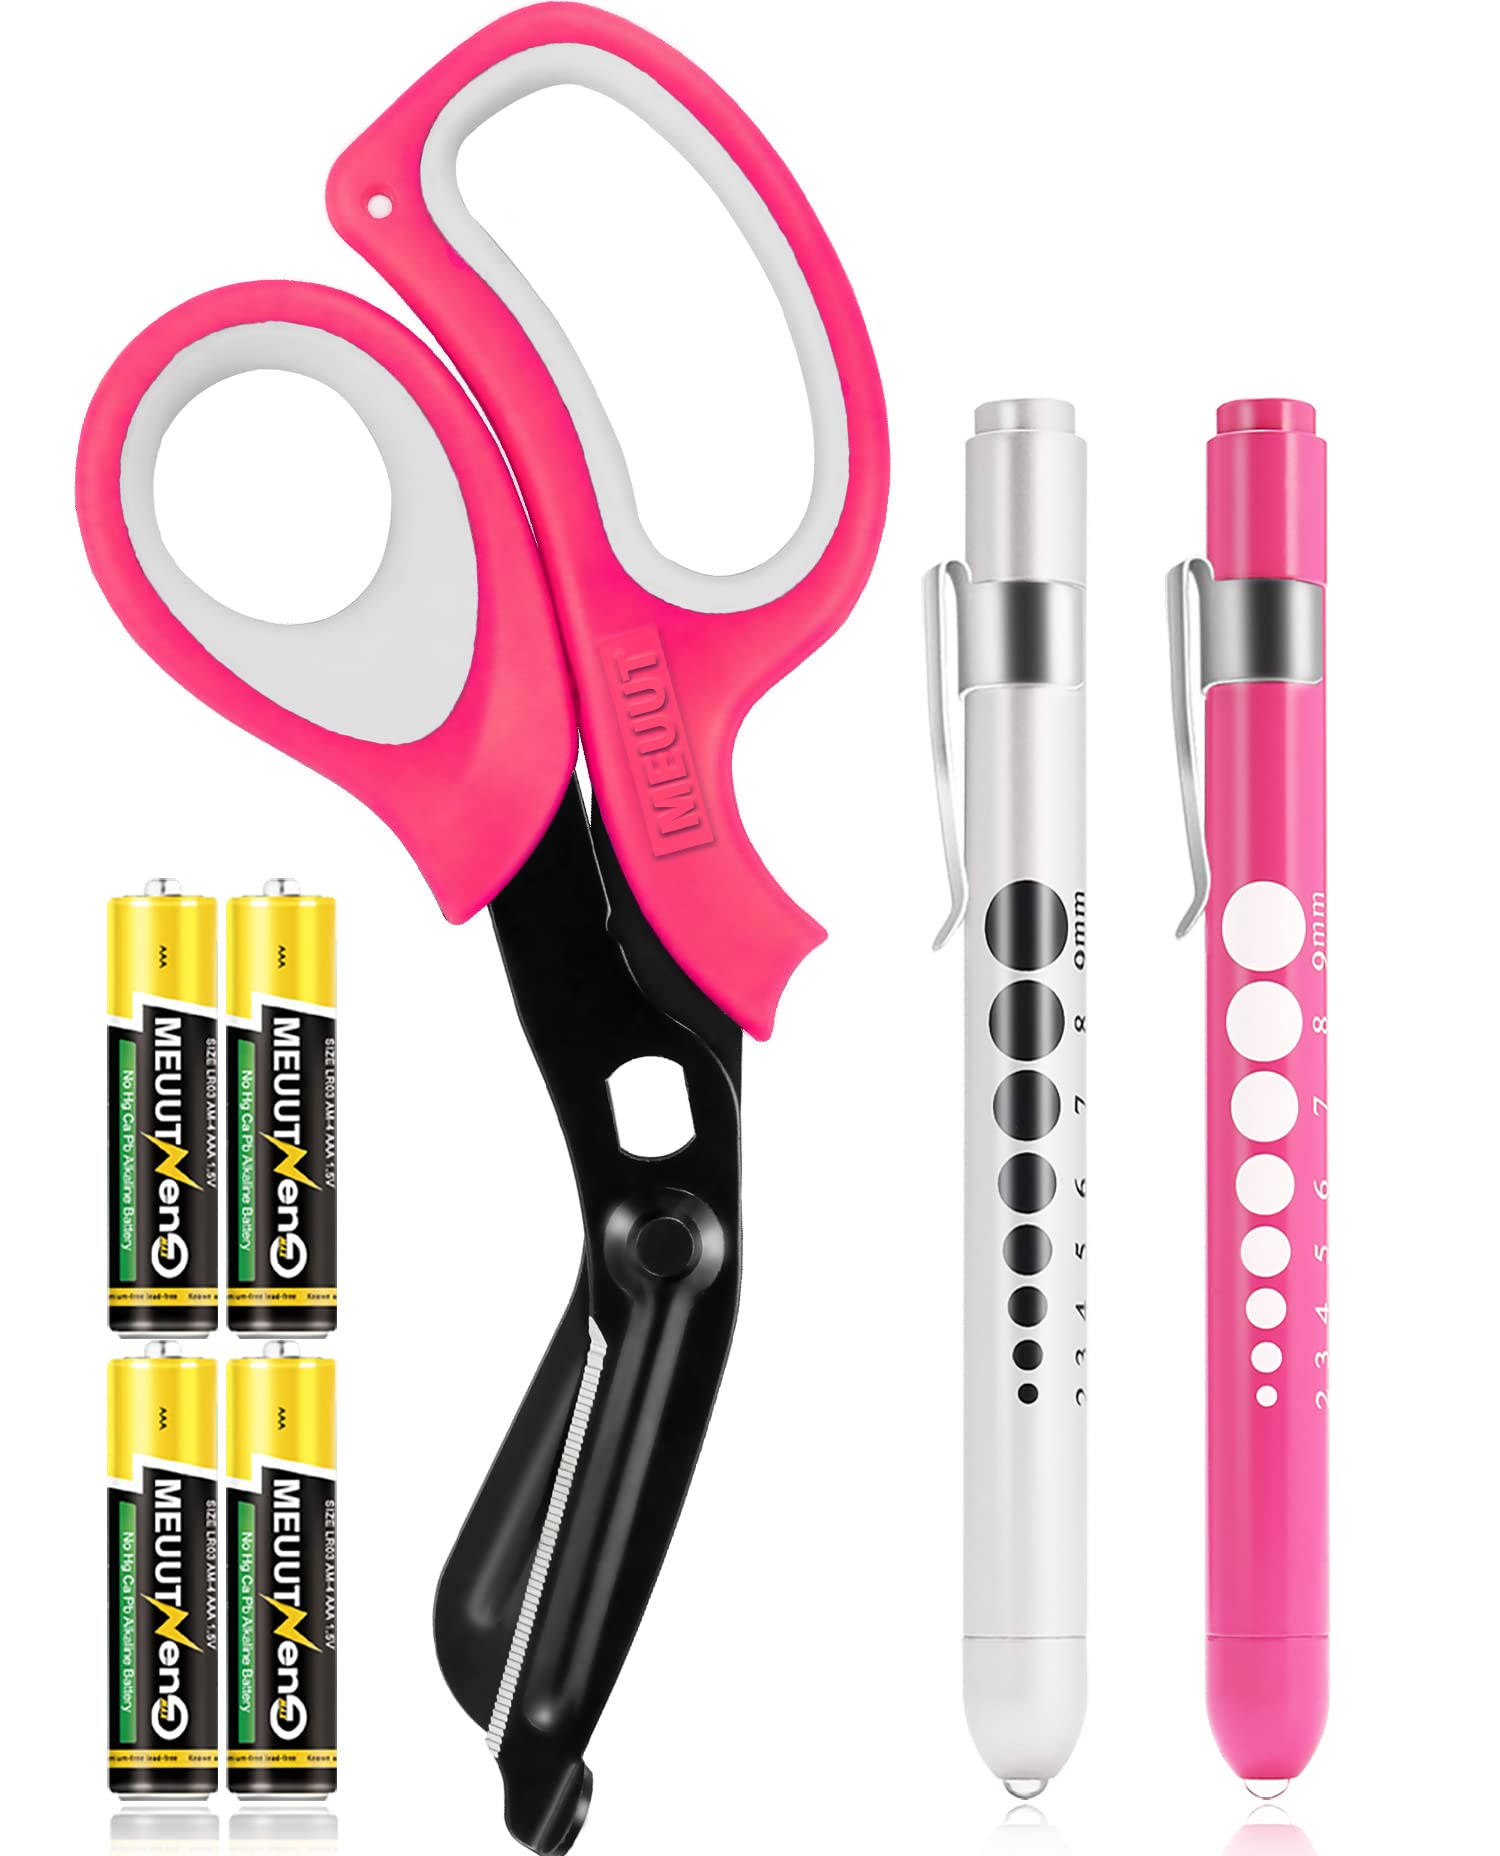 MEUUT 3 Pack Penlight & Medical Scissors- One 8 Inches Patented Trauma Shears Two LED Pen light with Four Batteries - Bandage Sc